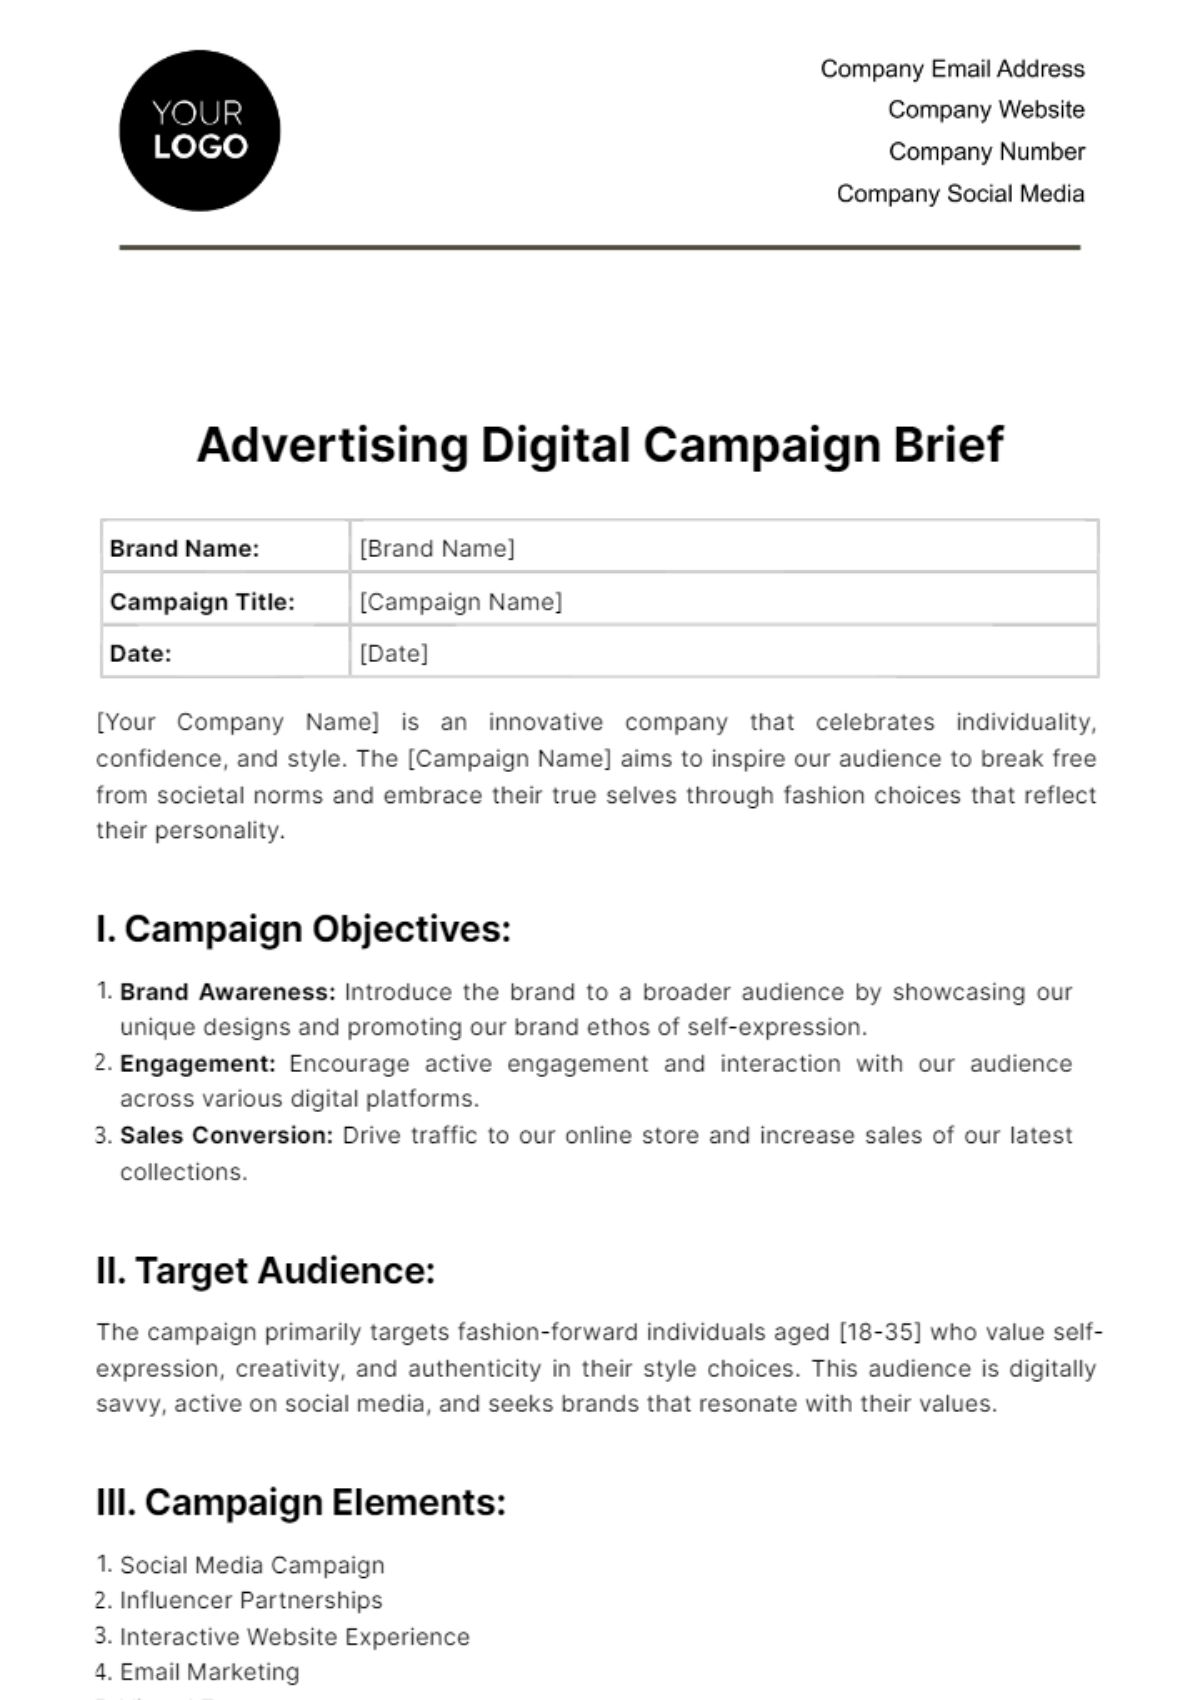 Free Advertising Digital Campaign Brief Template